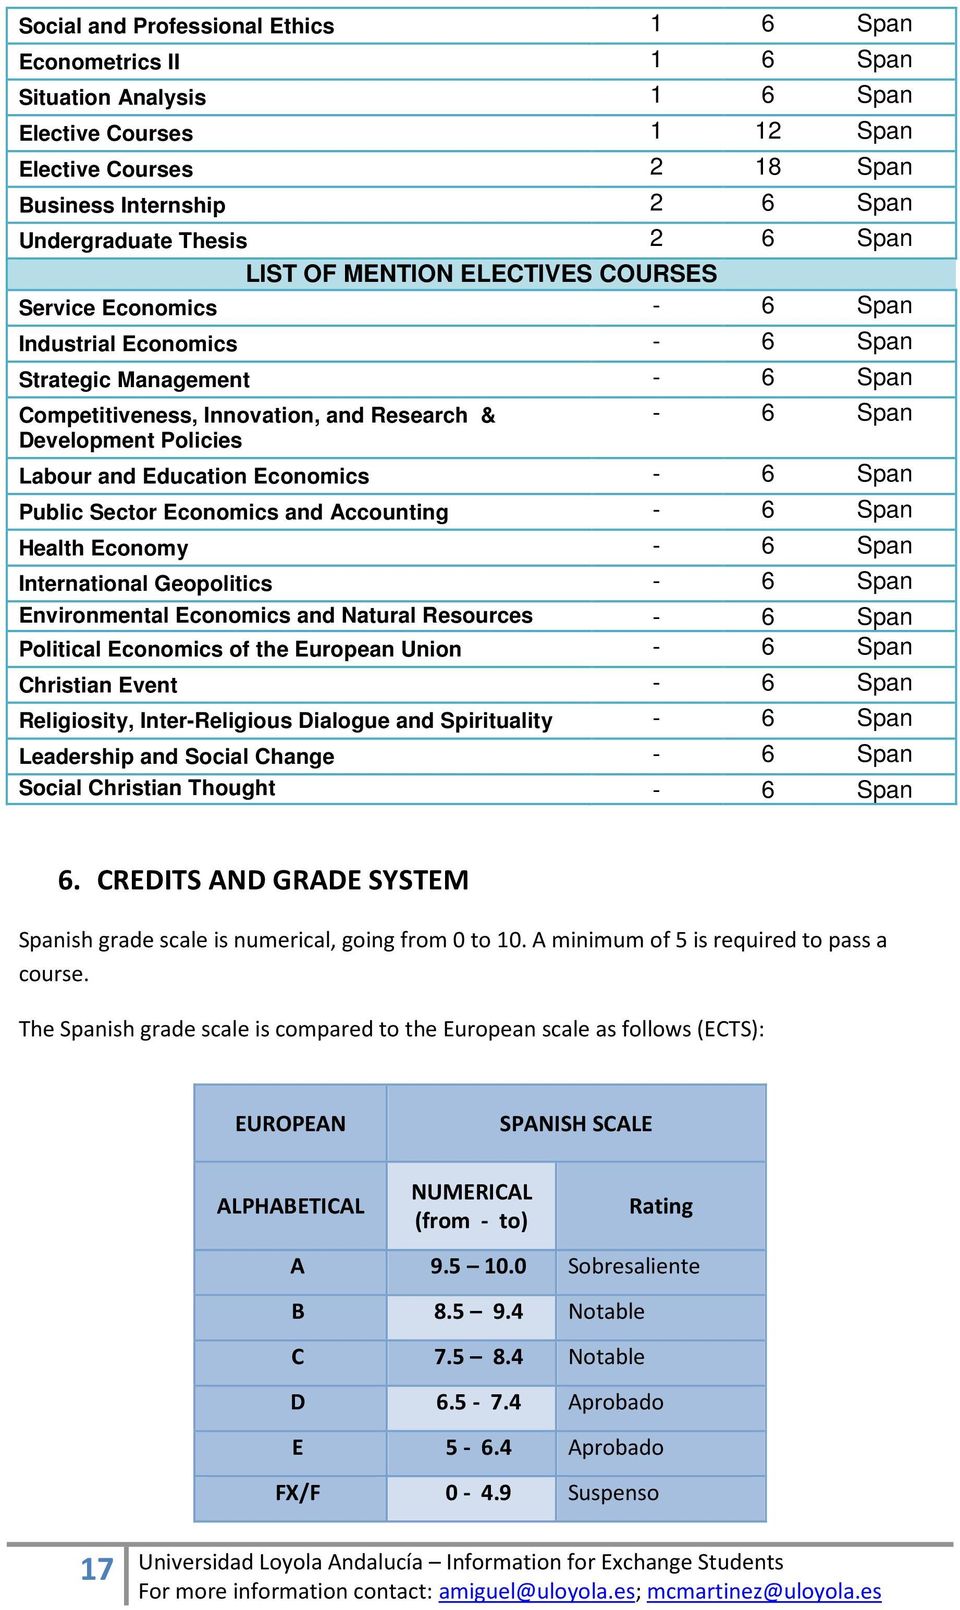 Span Labour and Education Economics - 6 Span Public Sector Economics and Accounting - 6 Span Health Economy - 6 Span International Geopolitics - 6 Span Environmental Economics and Natural Resources -